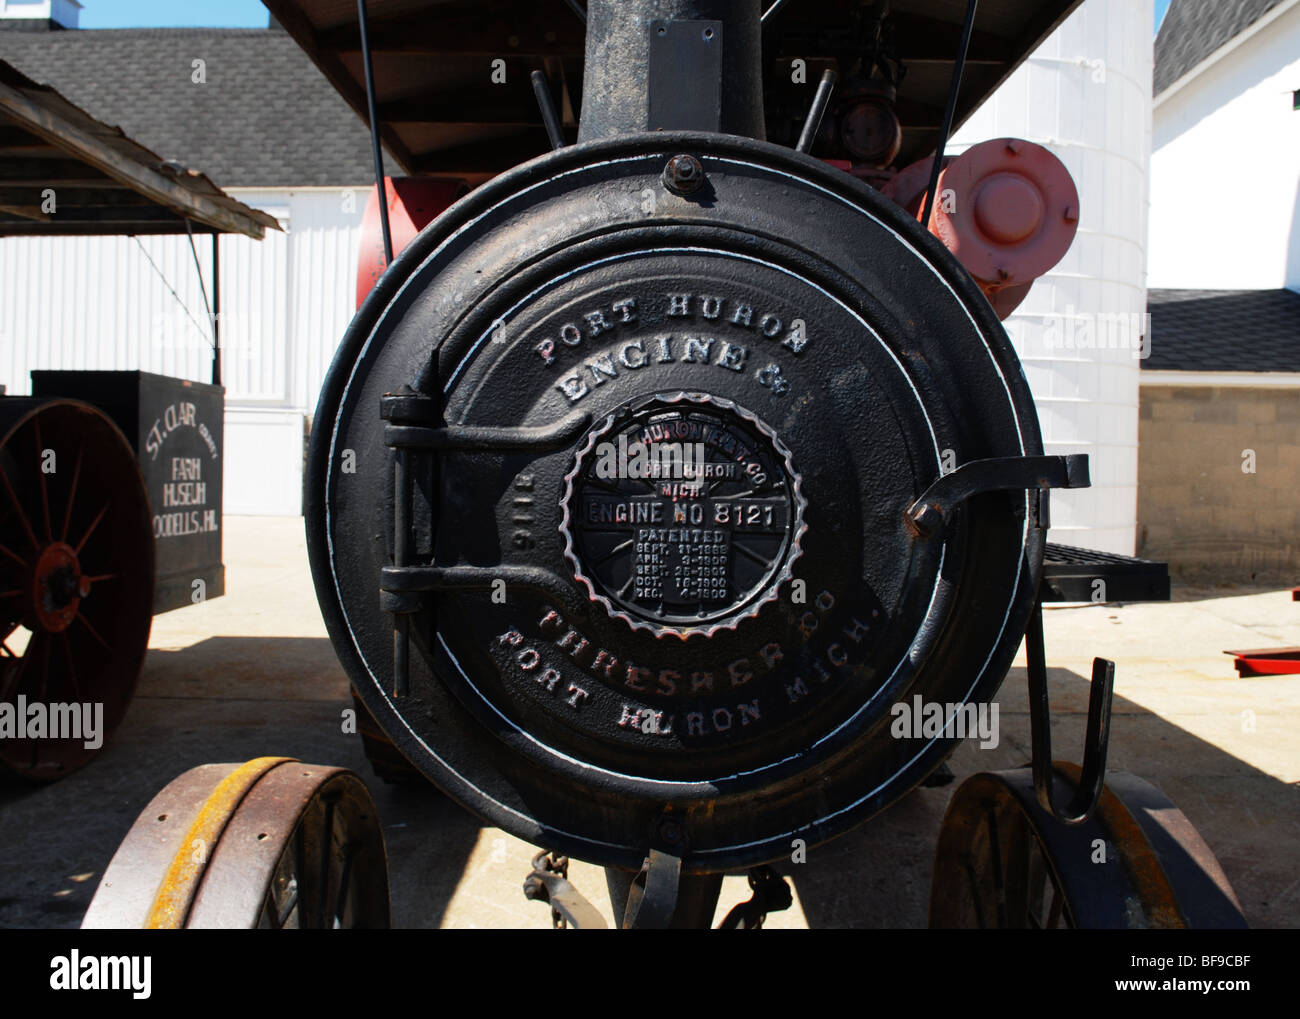 A Port Huron Engine Thresher steam engine is part of an antique farm machinery display at a midwest farm museum. Stock Photo